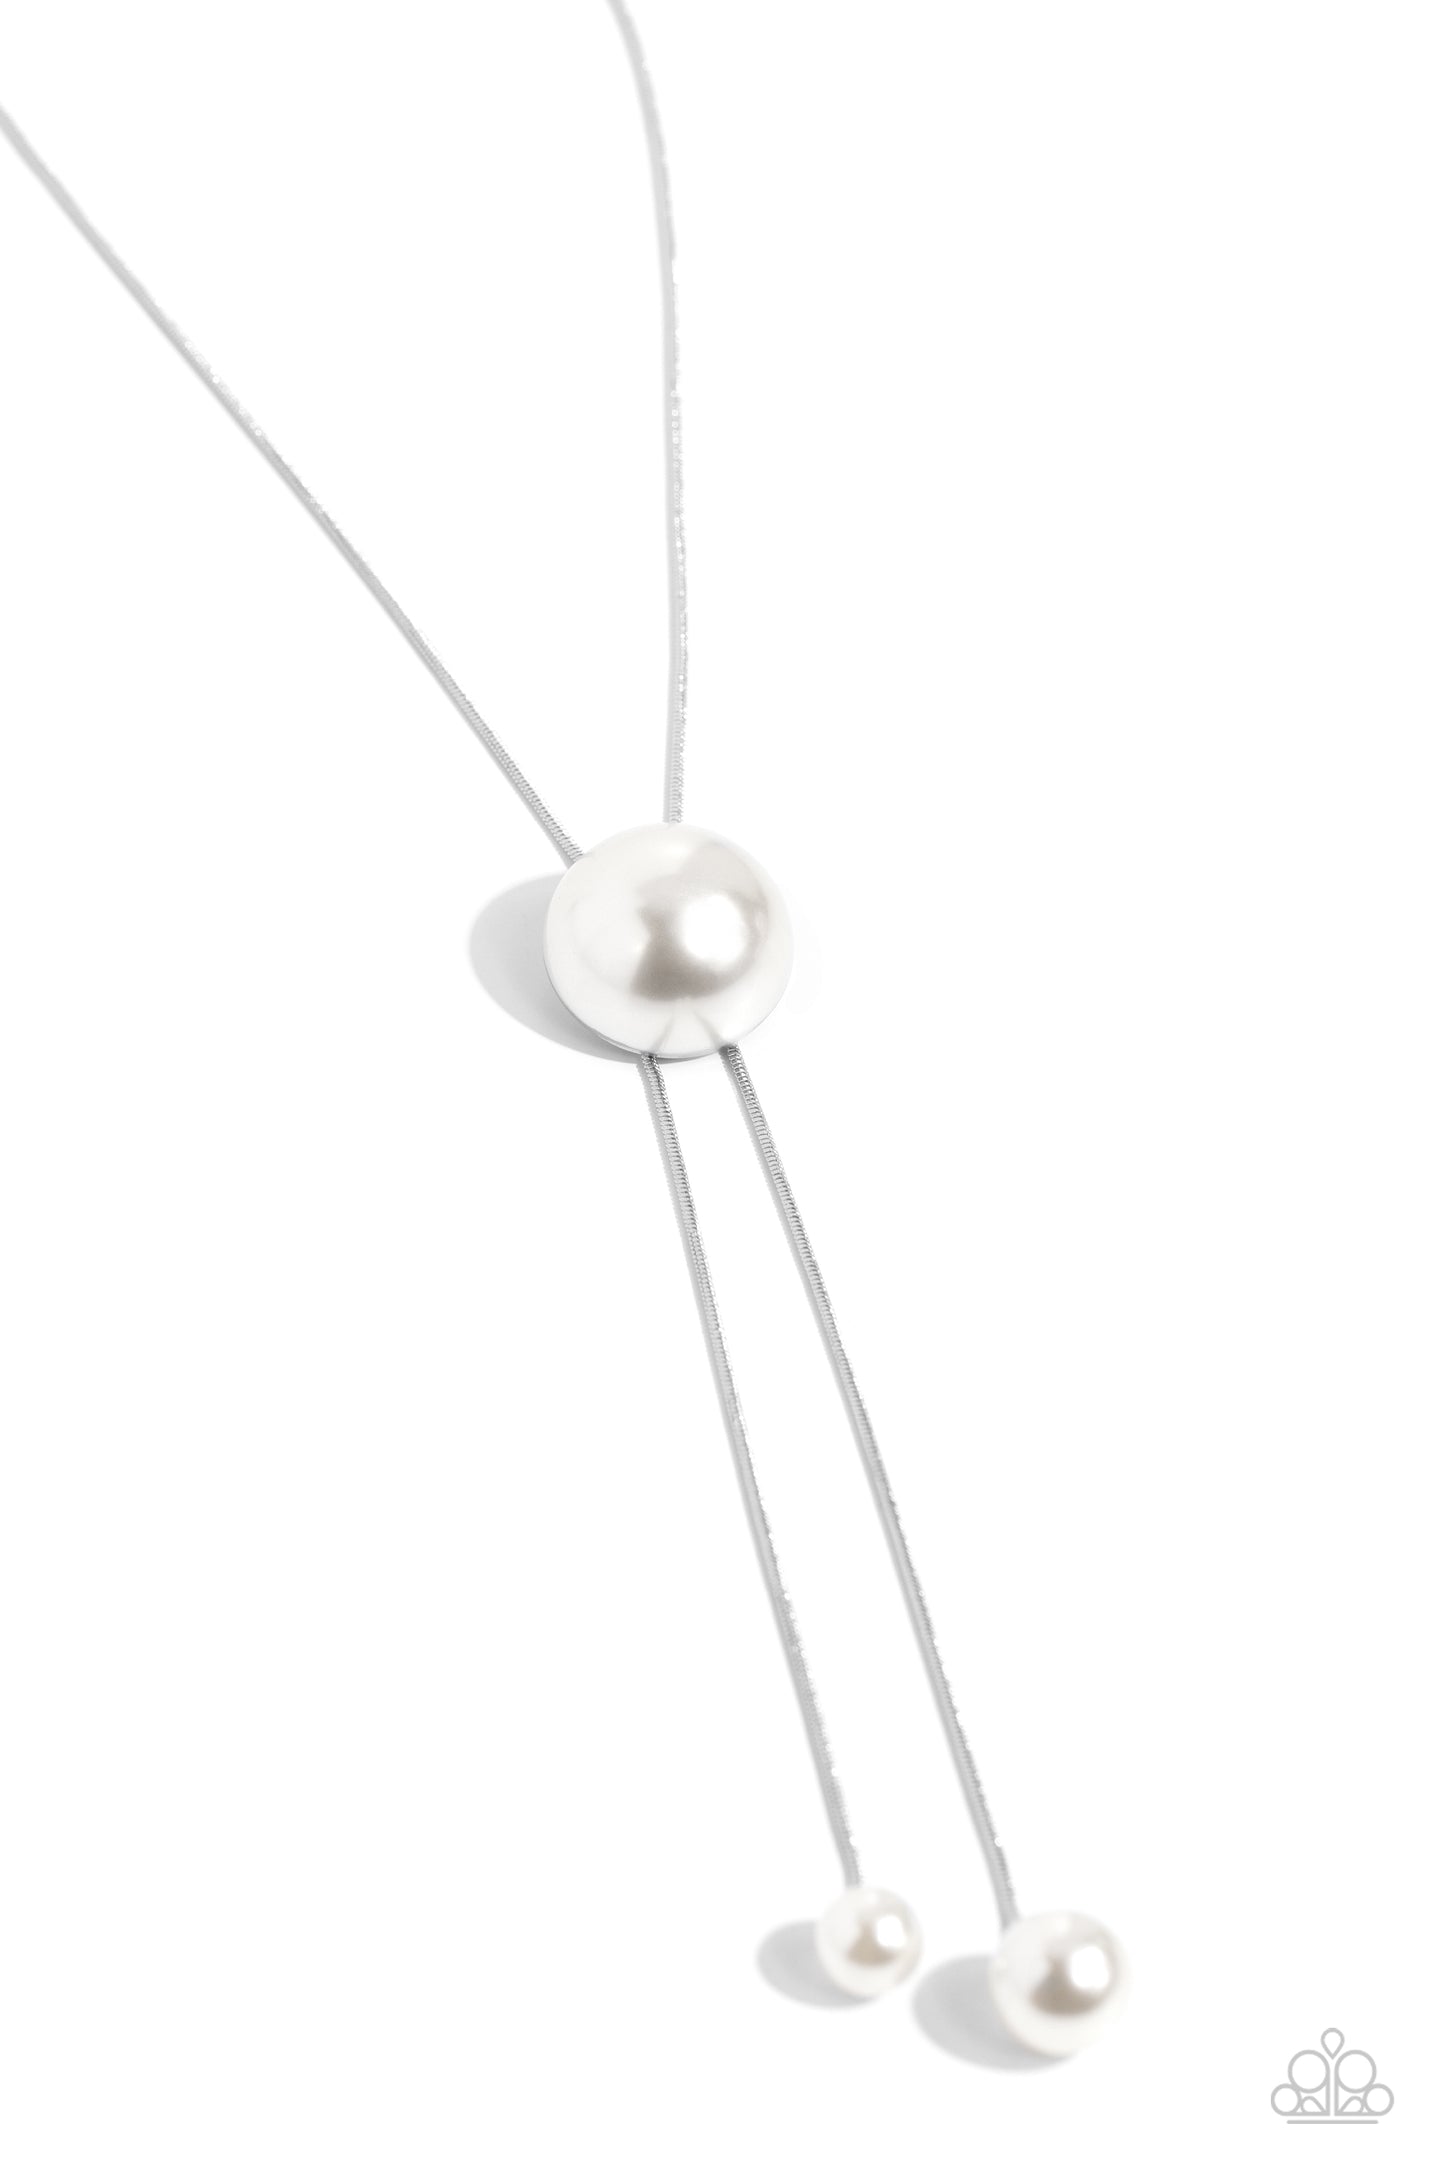 Corporate Couture White Pearl Bolo Necklace - Paparazzi Accessories  An exaggeratedly large white half-pearl overlaps into an adjustable pendant along a silver snake chain for a refined, business-inspired look. Two smaller white pearls dangle below the exaggerated pearl setting for additional high-sheen class. Features a bolo closure.  Sold as one individual necklace. Includes one pair of matching earrings.  SKU: P2RE-WTXX-663XX